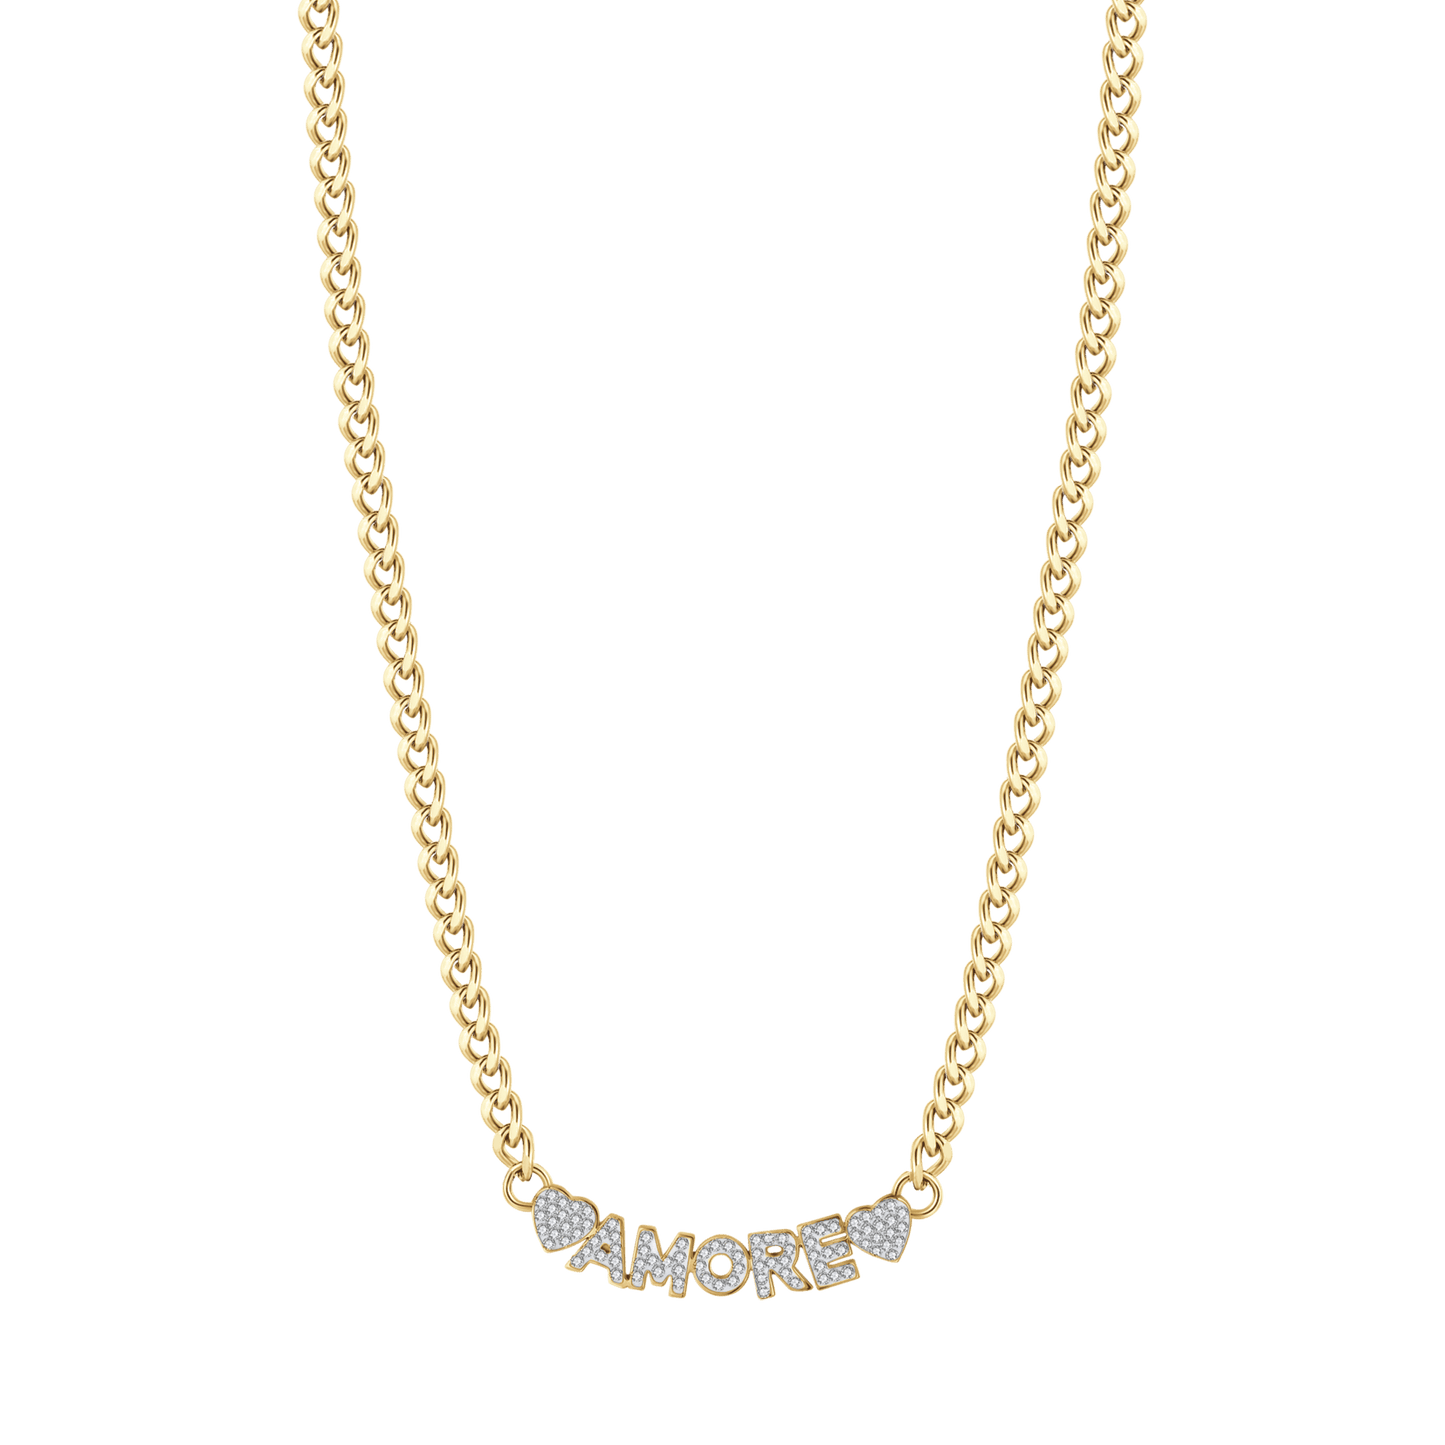 GOLD LOVE STEEL WOMEN'S NECKLACE WITH WHITE CRYSTALS